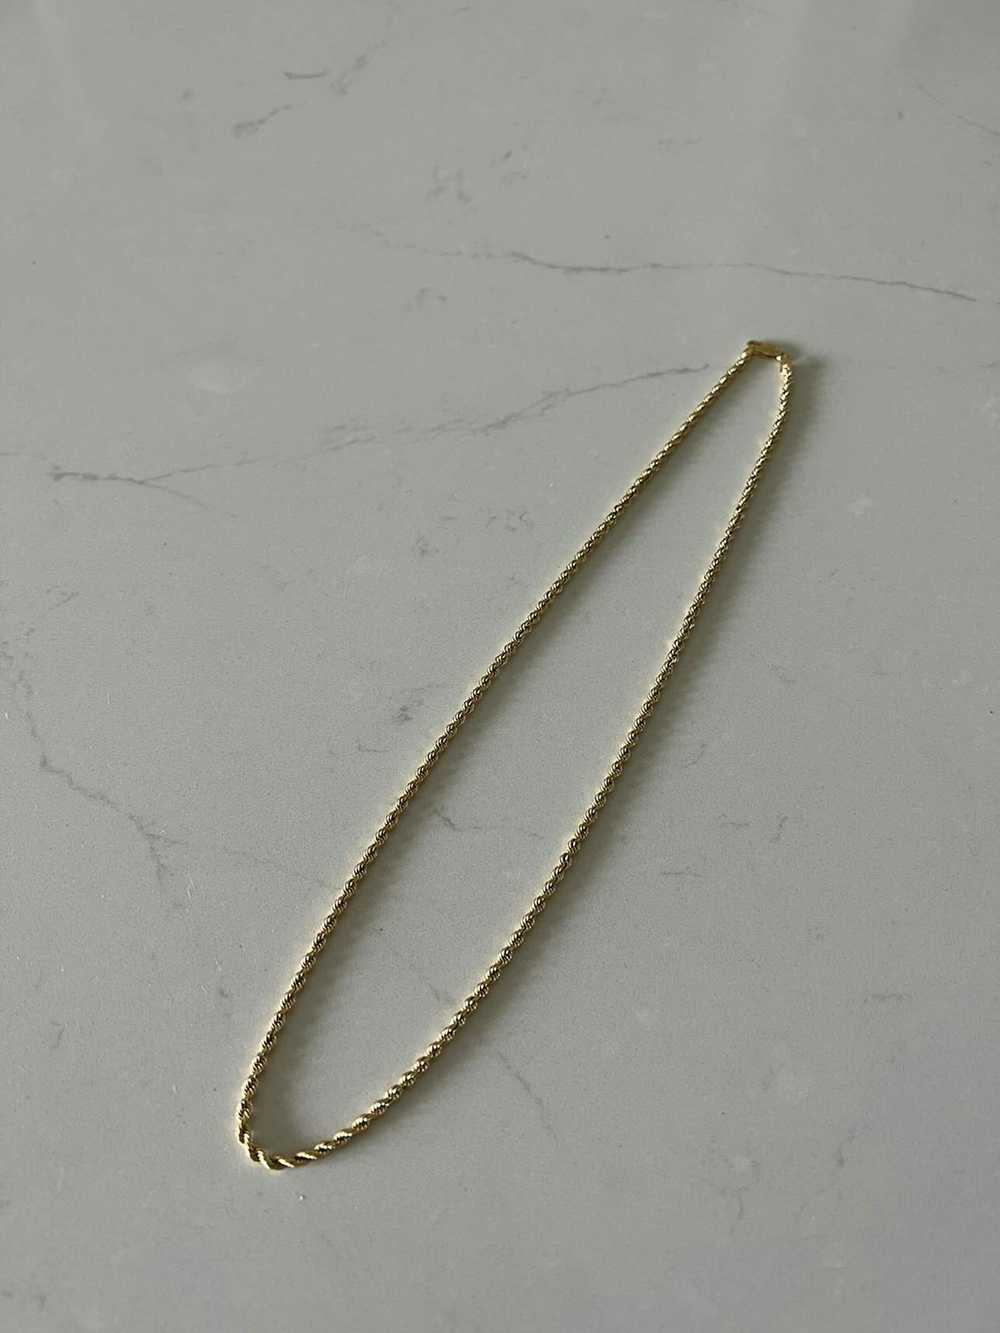 Gold 14k 20 inch rope chain - image 1